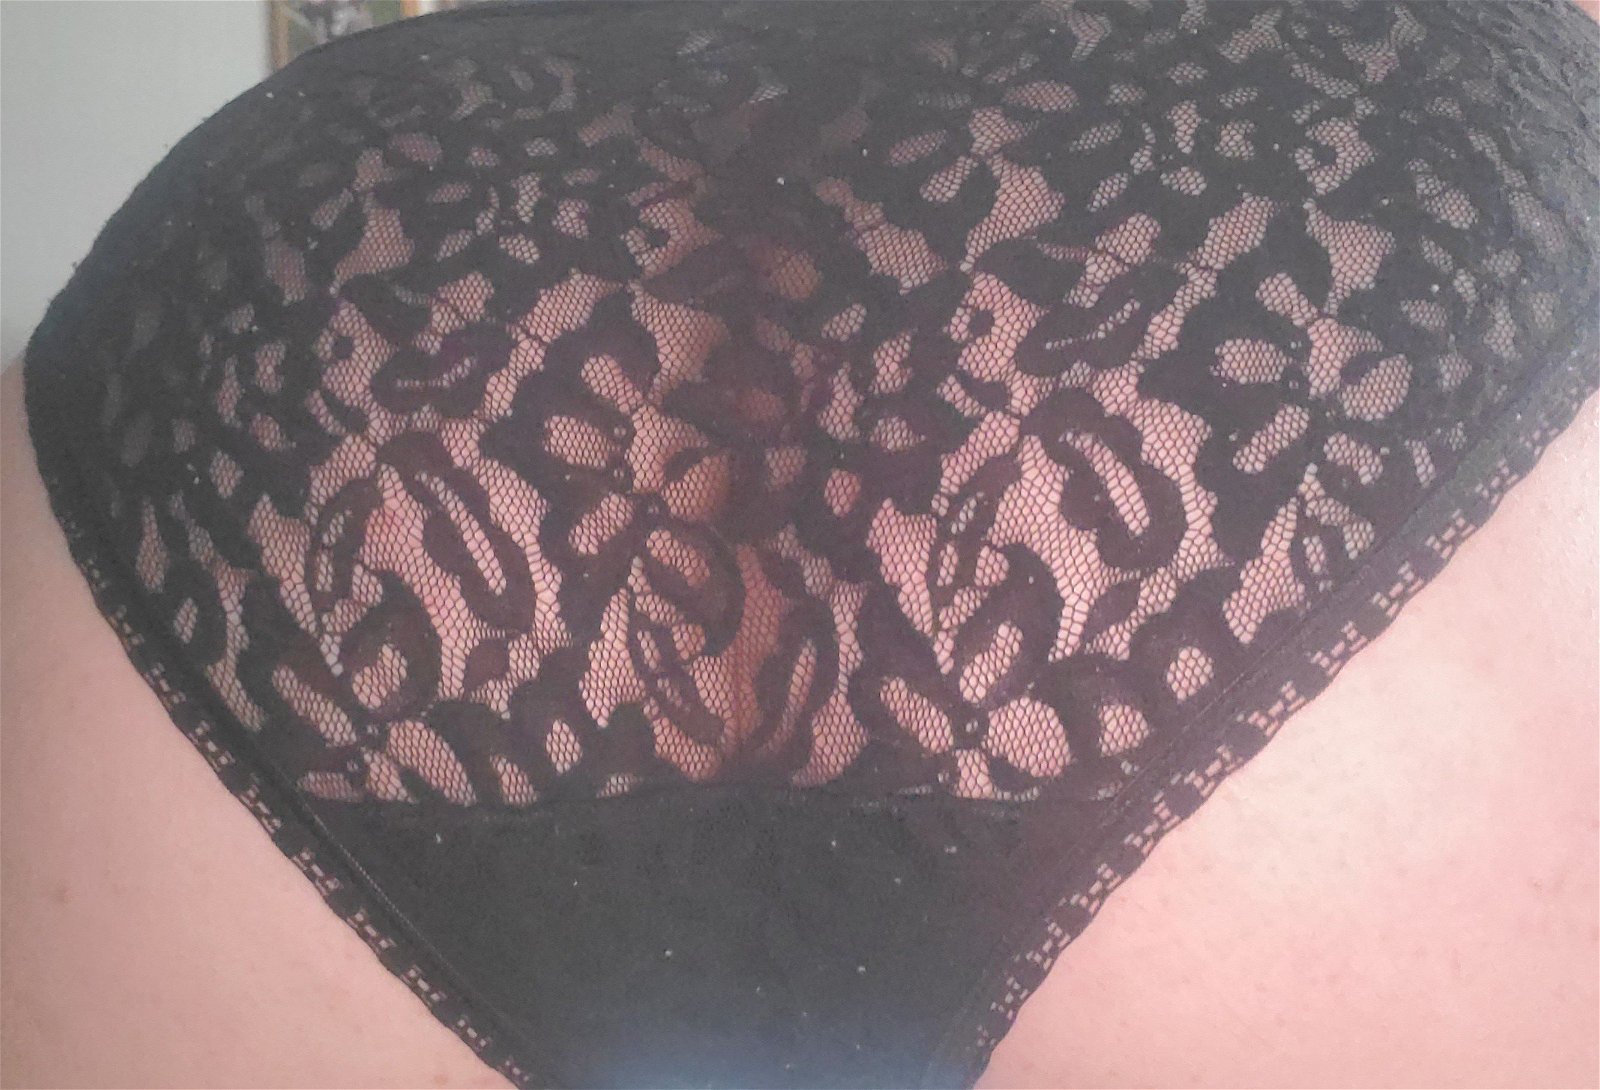 Photo by Sugartits07 with the username @Sugartits07, who is a star user,  August 22, 2022 at 5:45 PM. The post is about the topic Bra/Panty/Lingerie/Bikini and the text says 'Getting ready for my day 😘'